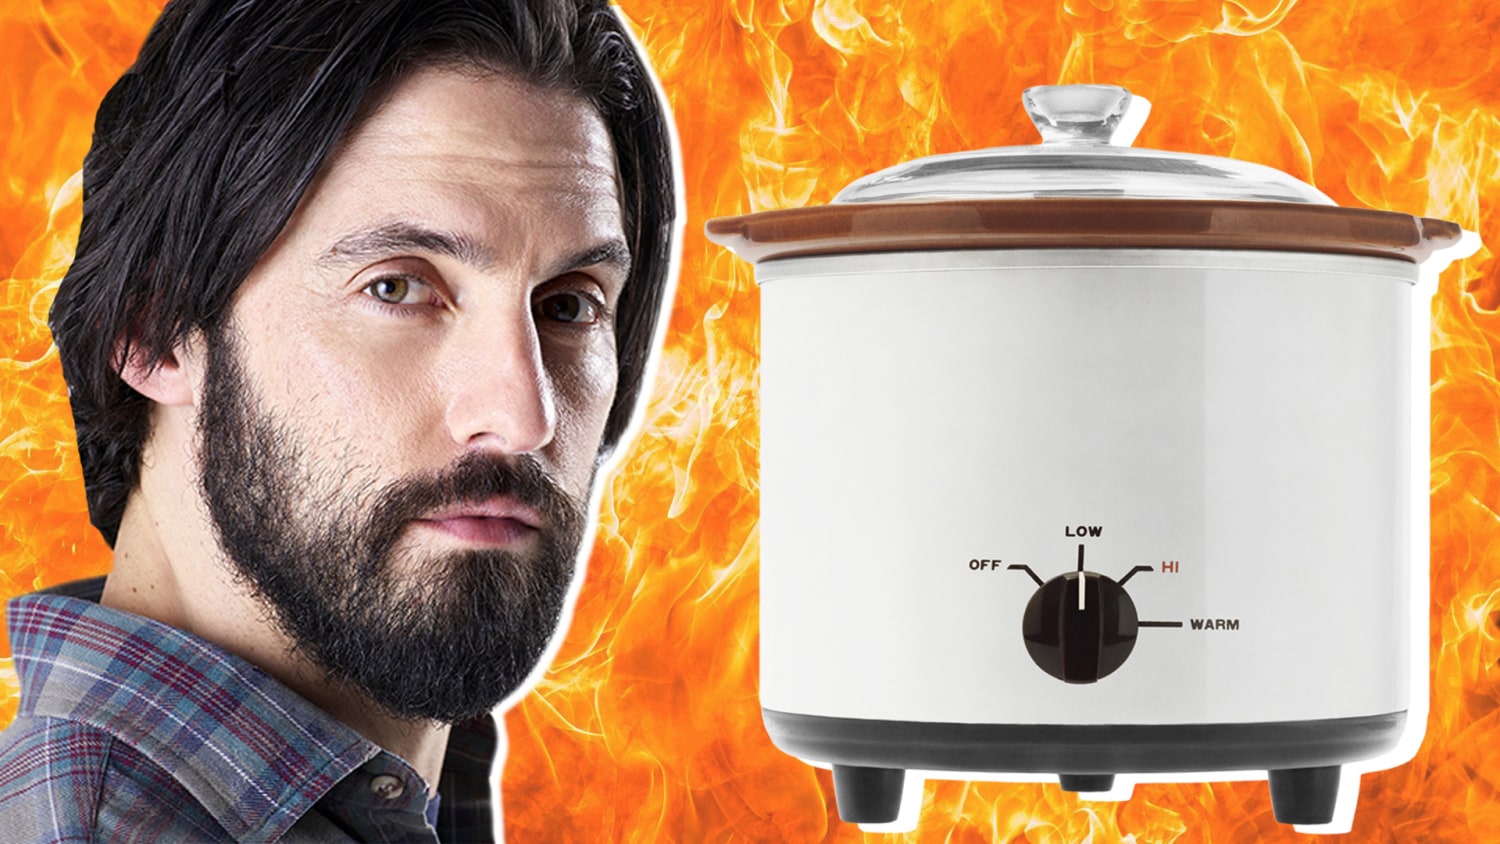 Shop 's Big Deal Days Early with These Slow-Cookers Starting